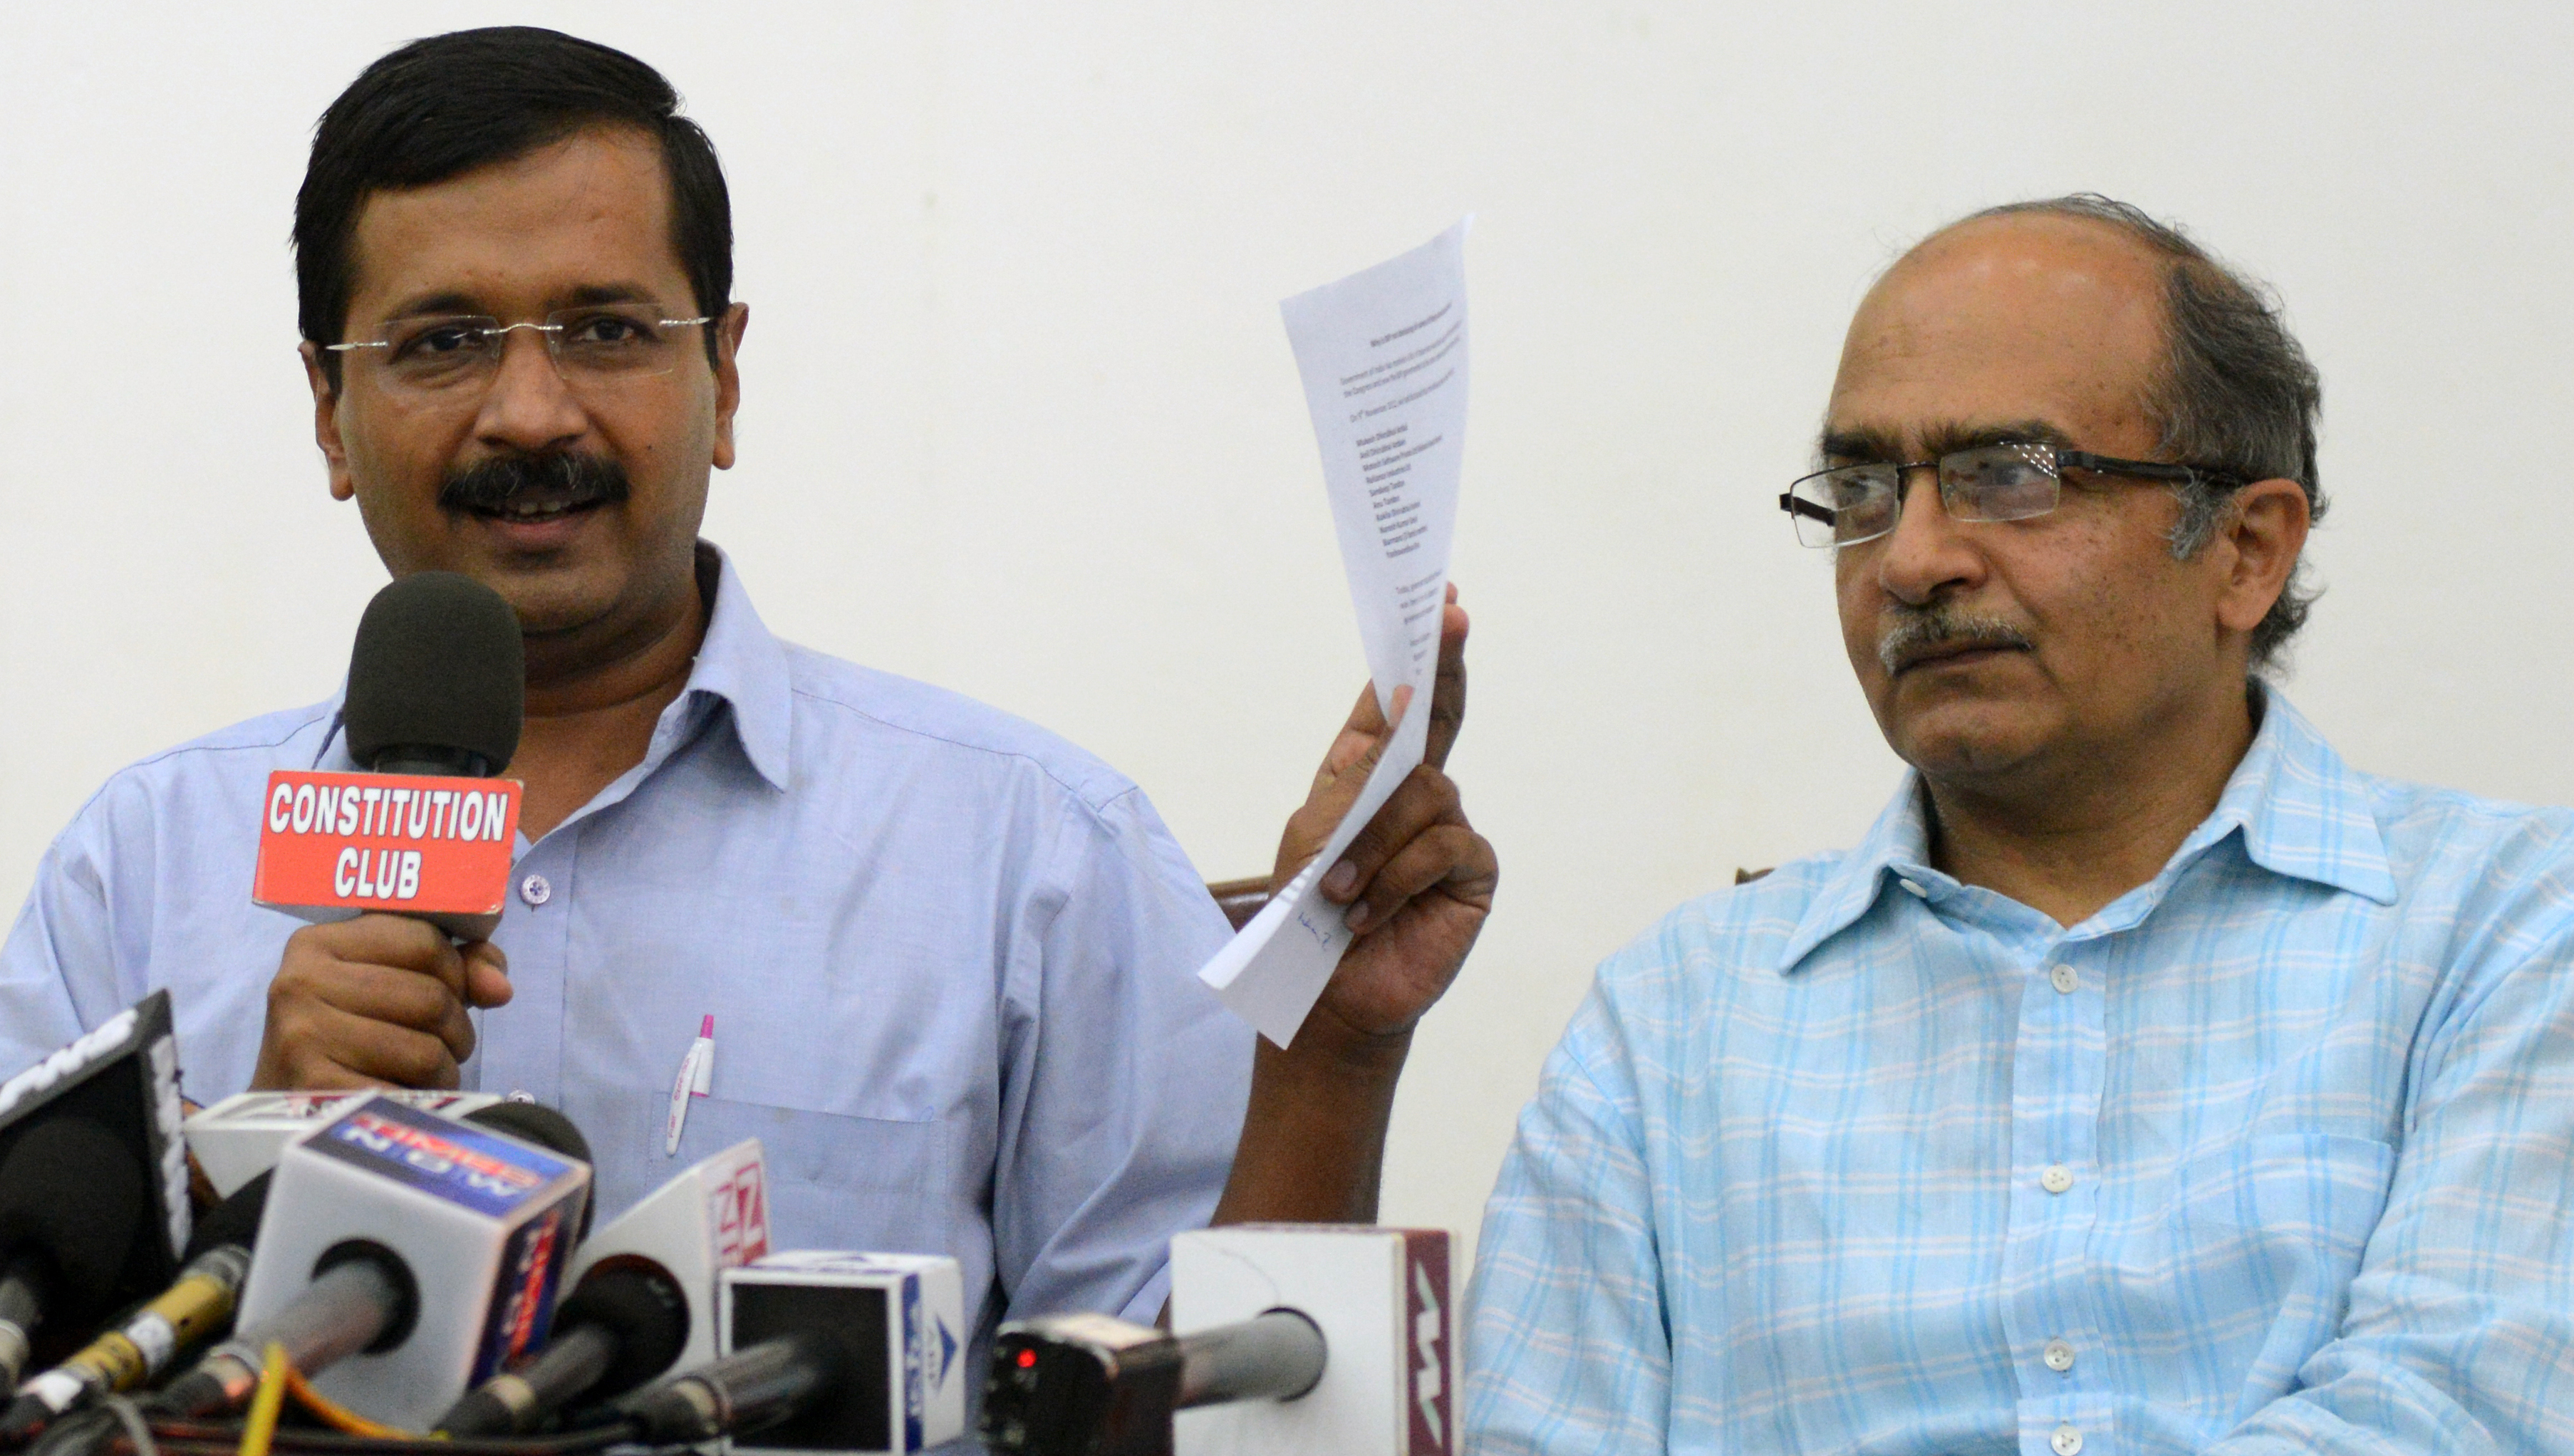 Aam Aadmi Party convener Arvind Kejriwal and Prashant Bhushan addressing the media in New Delhi (Praveen Negi—India Today Group/Getty Images)